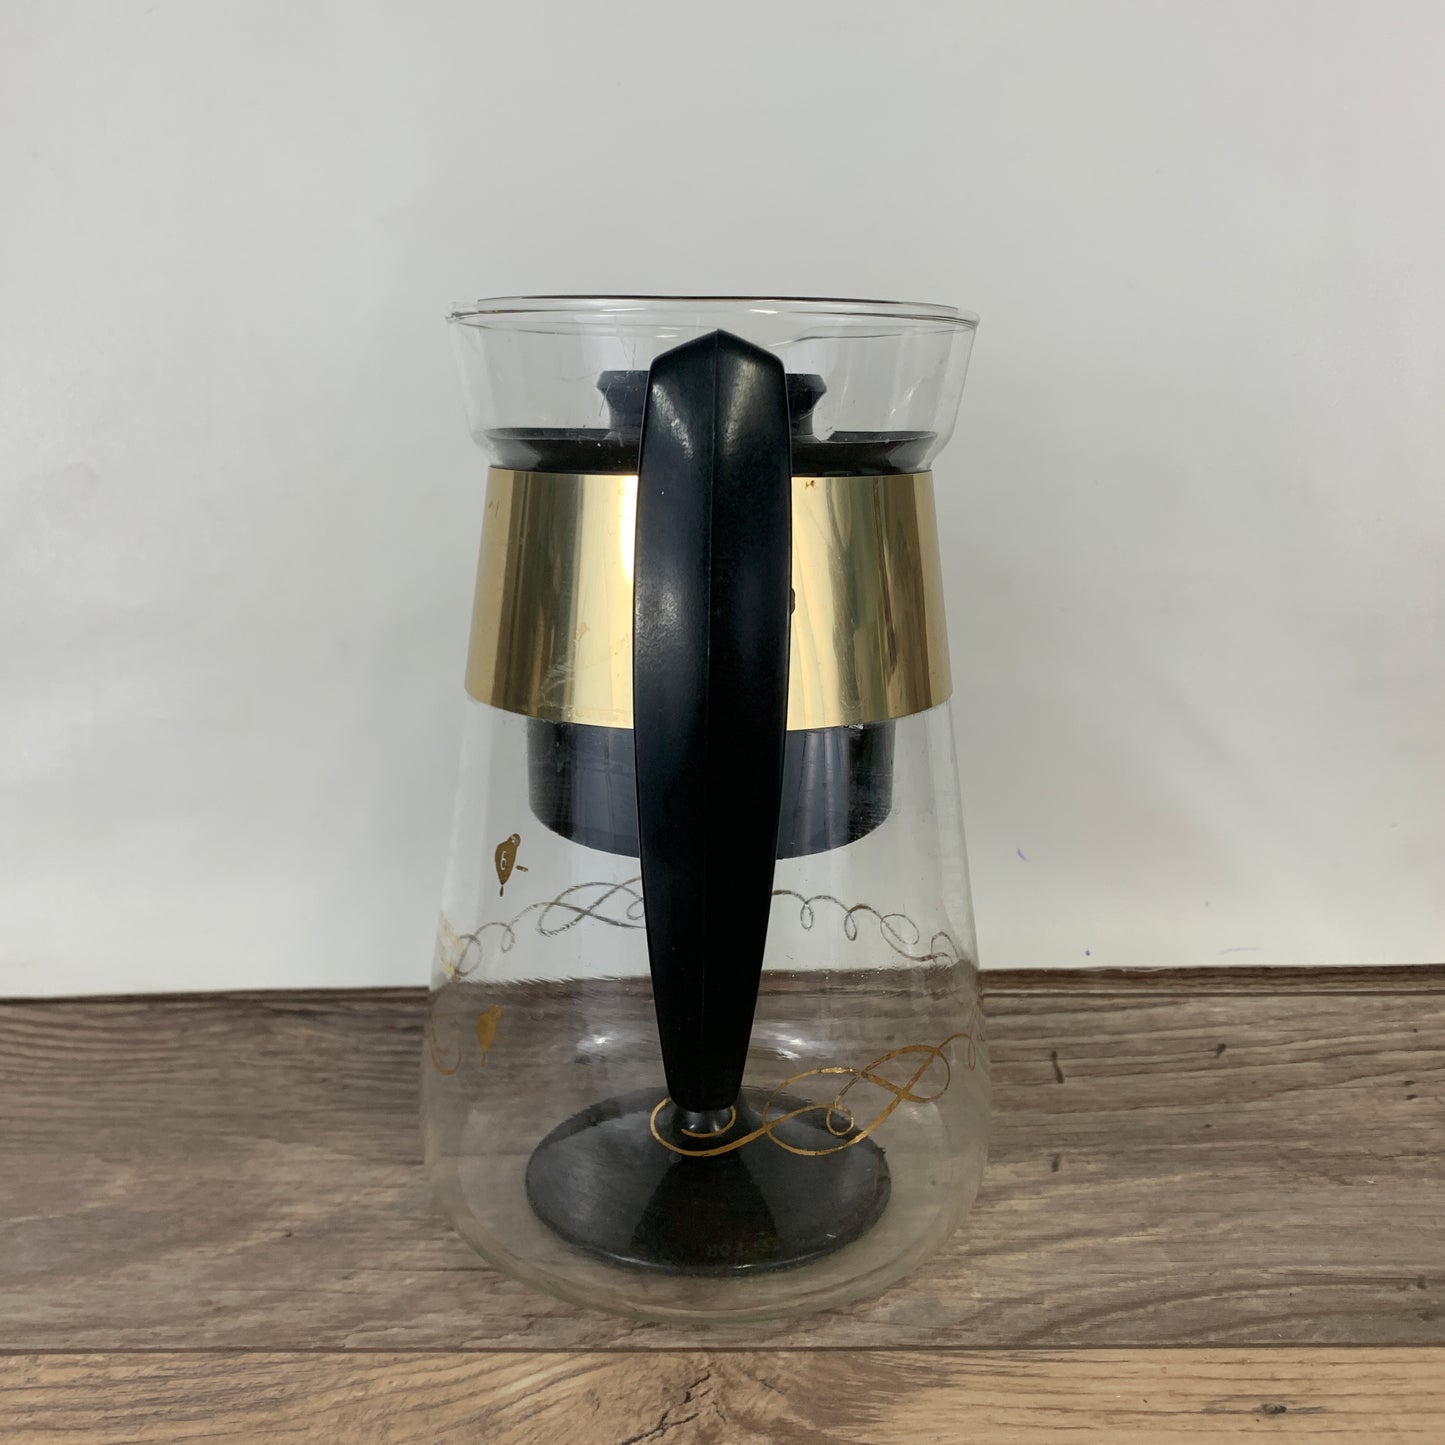 Glass Coffee Percolator with Plastic Insert Black and Gold Vintage Coffee Maker